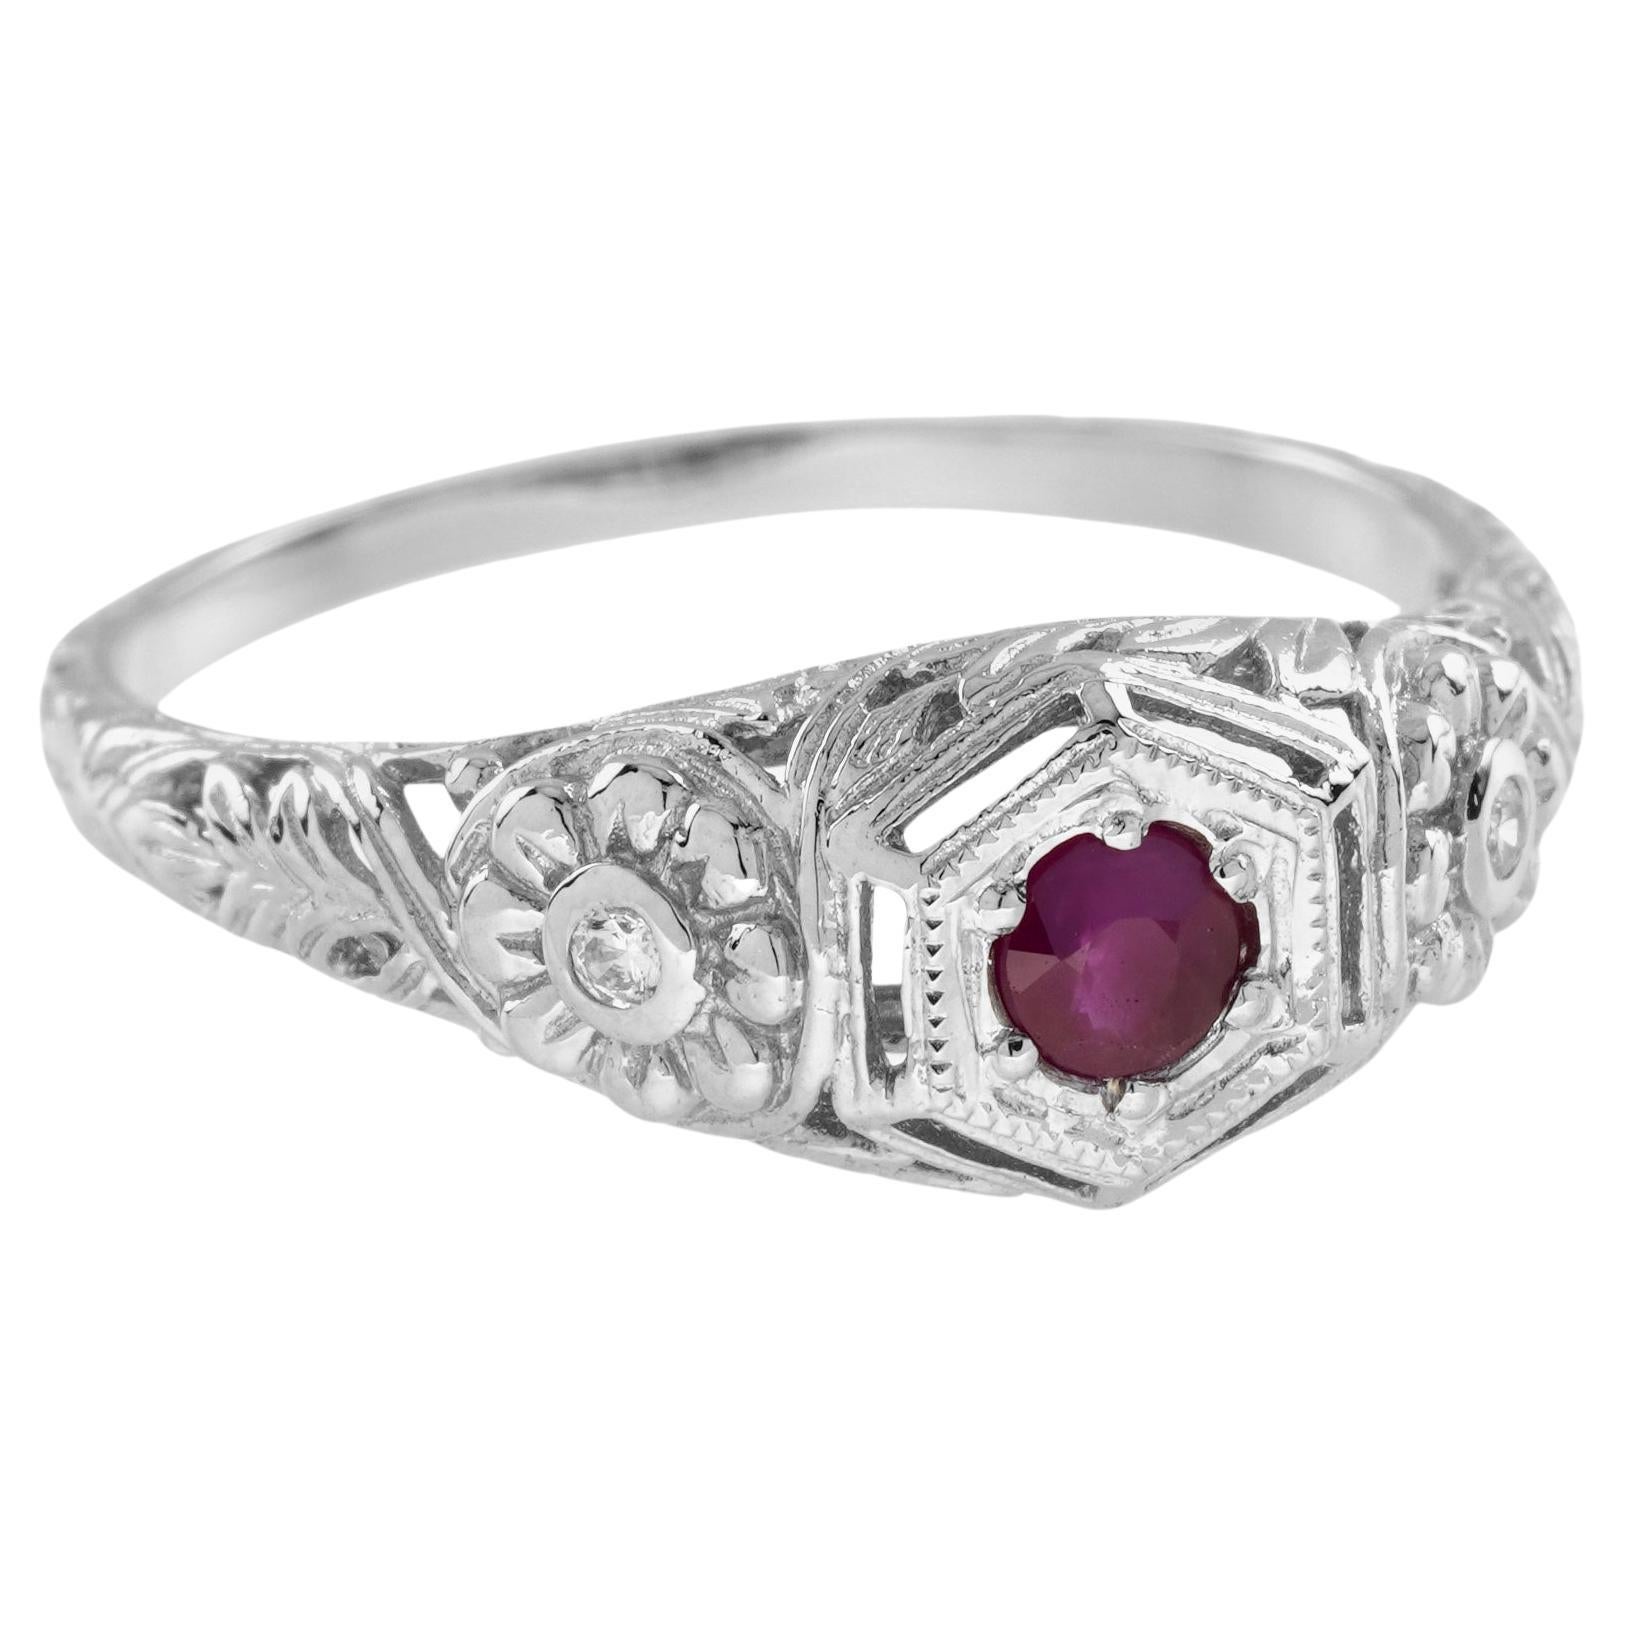 For Sale:  Natural Ruby Diamond Vintage Style Floral Filigree Ring in 9K White Gold